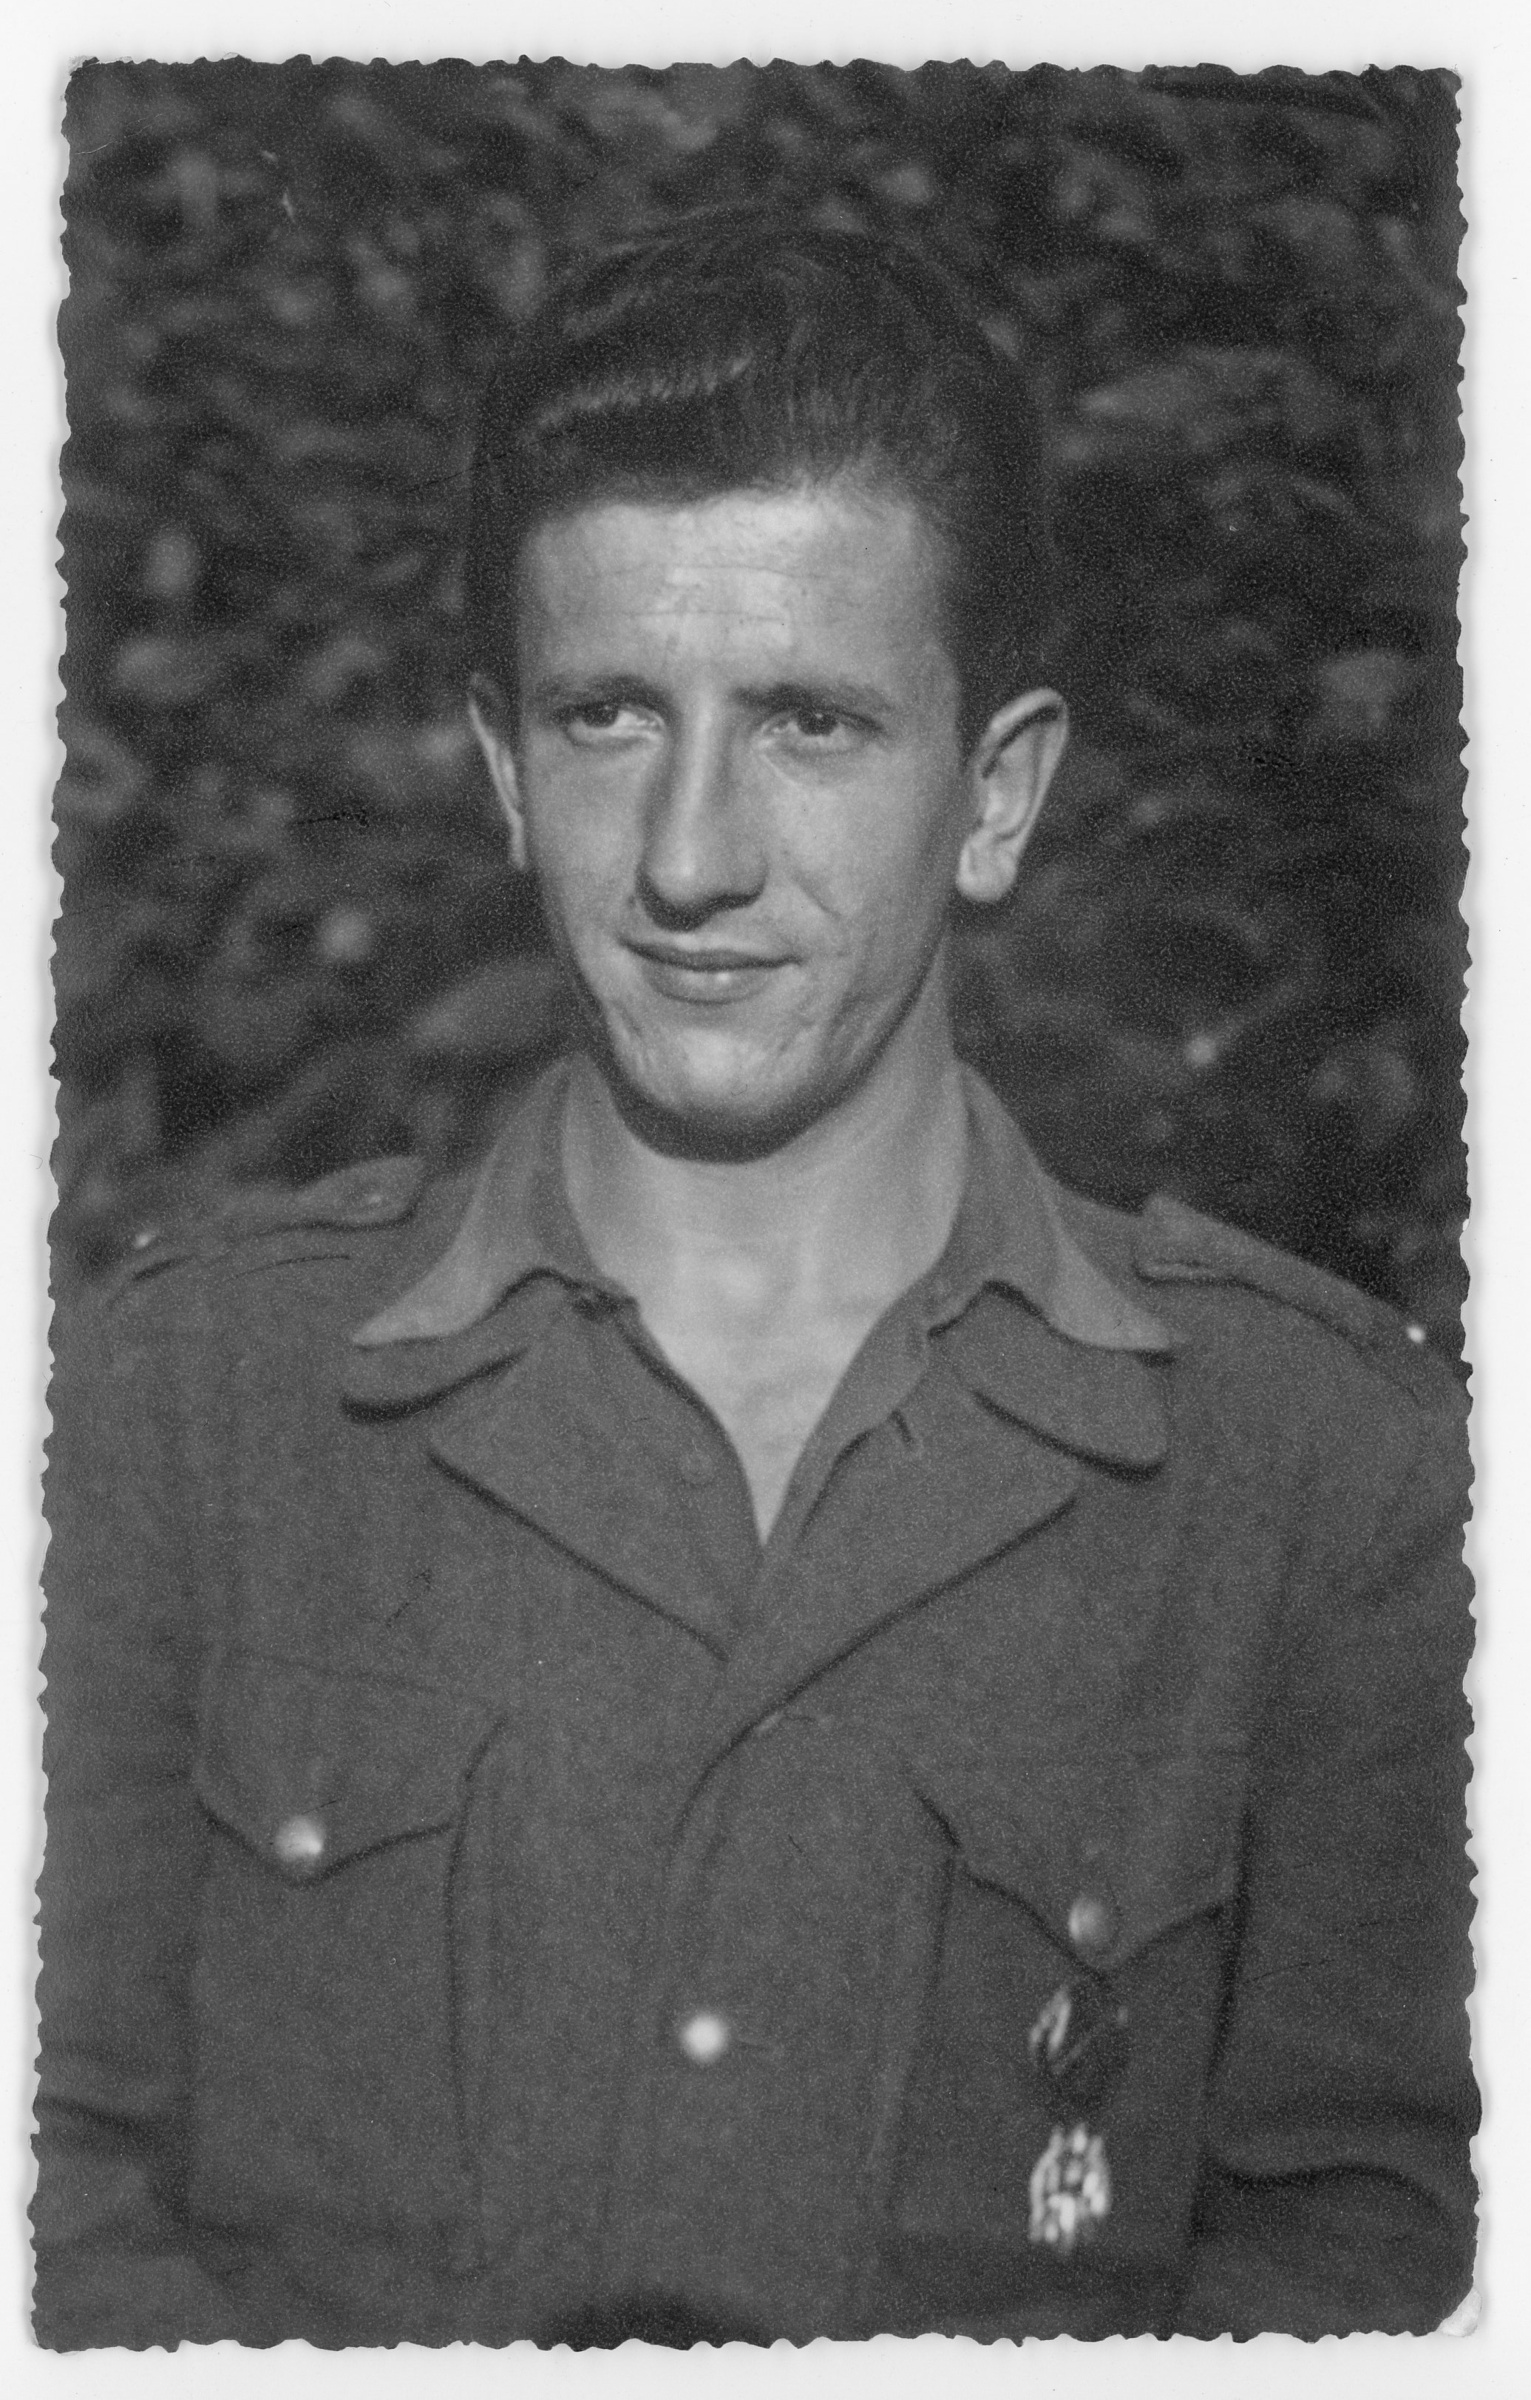 26 - Military service in 1945